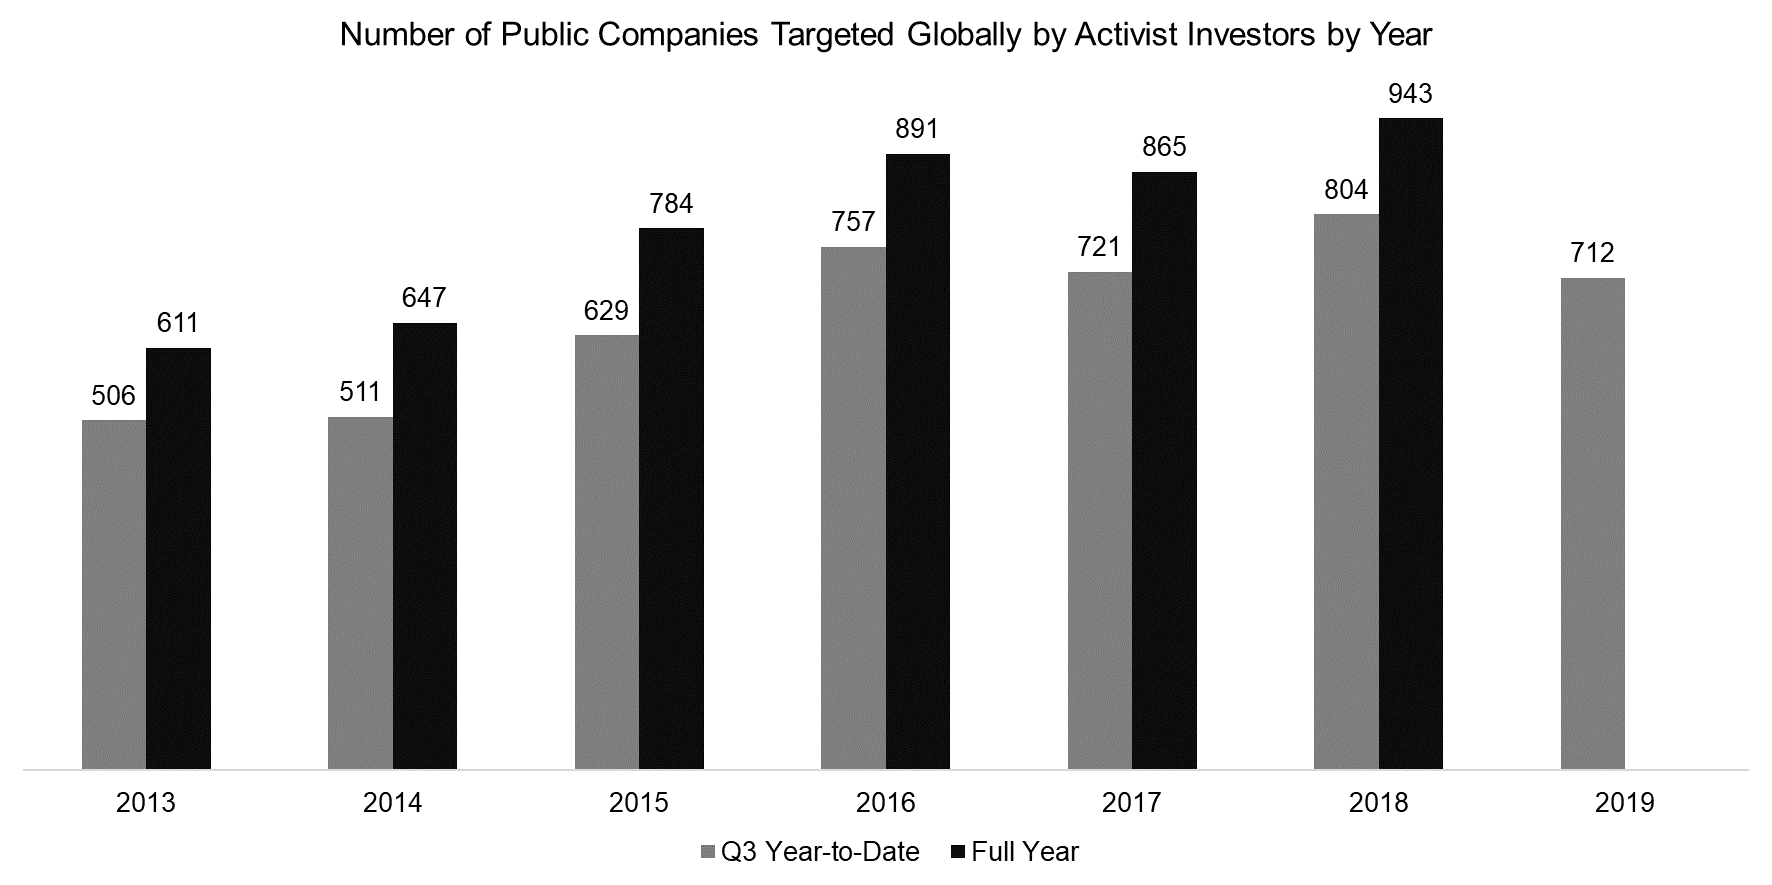 Number of Public Companies Targeted Globally by Activist Investors by Year